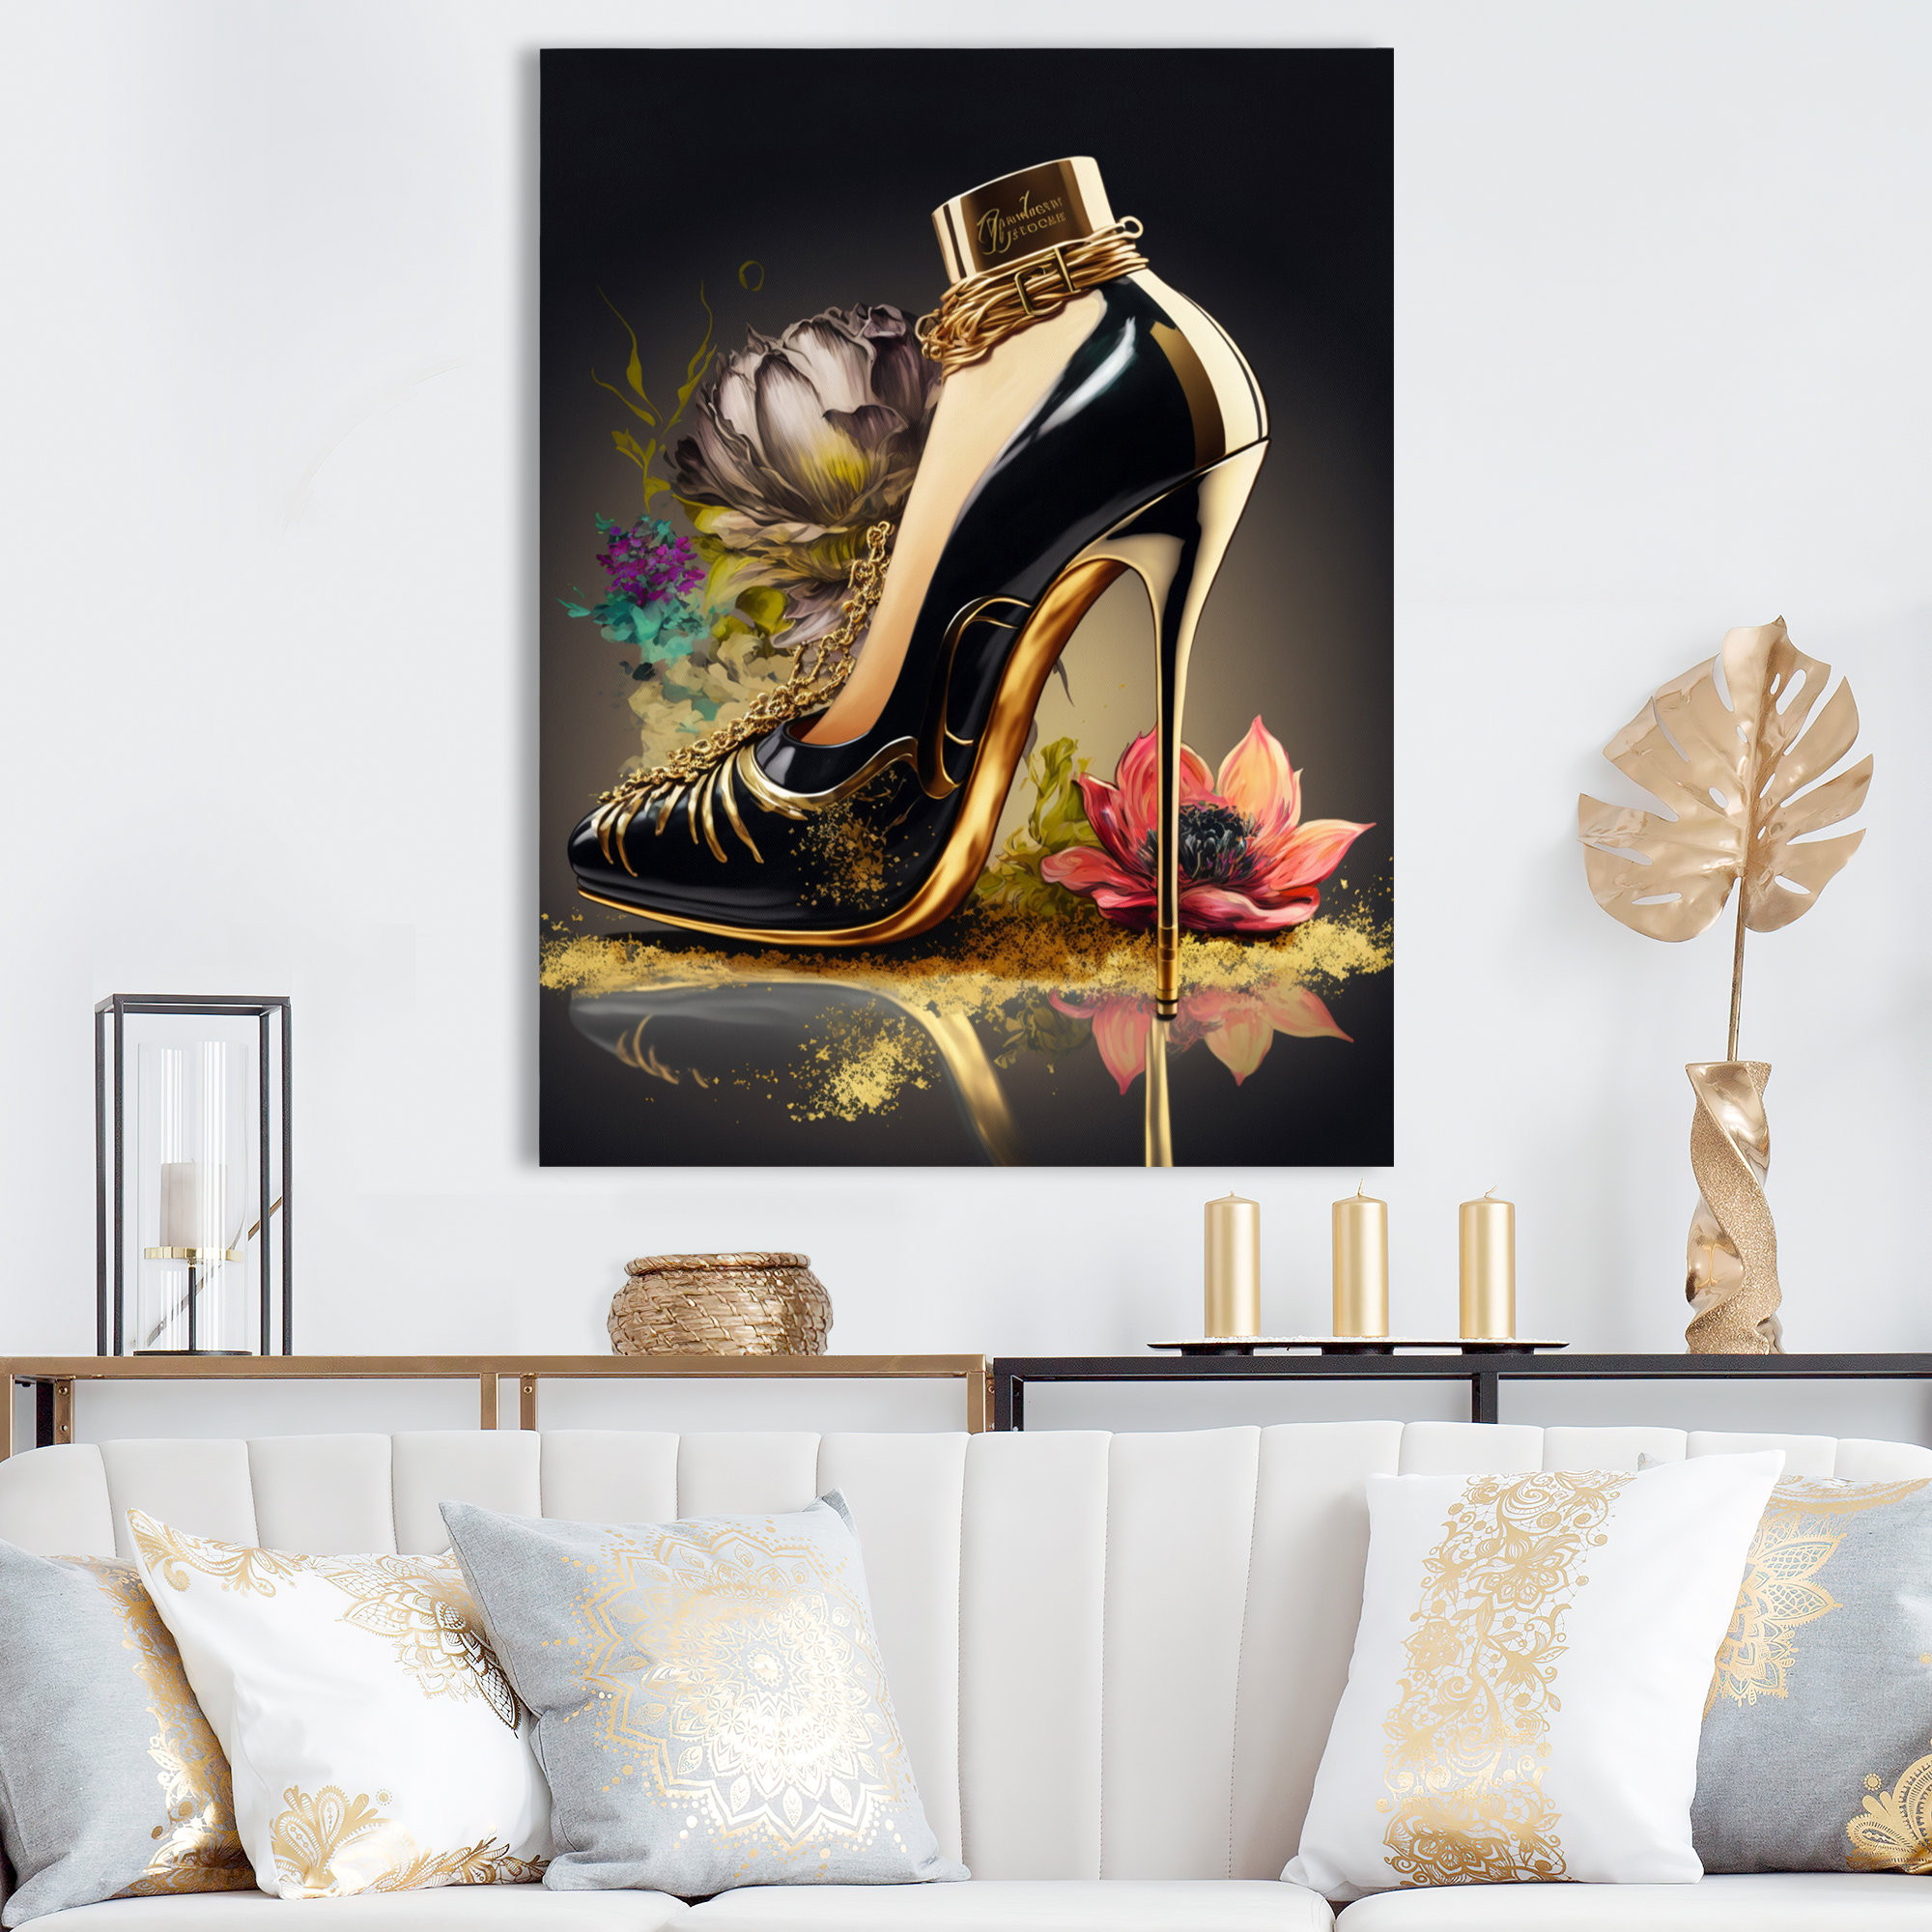 Gold & Black Book Stack With Black Heel Throw Pillow By Amanda